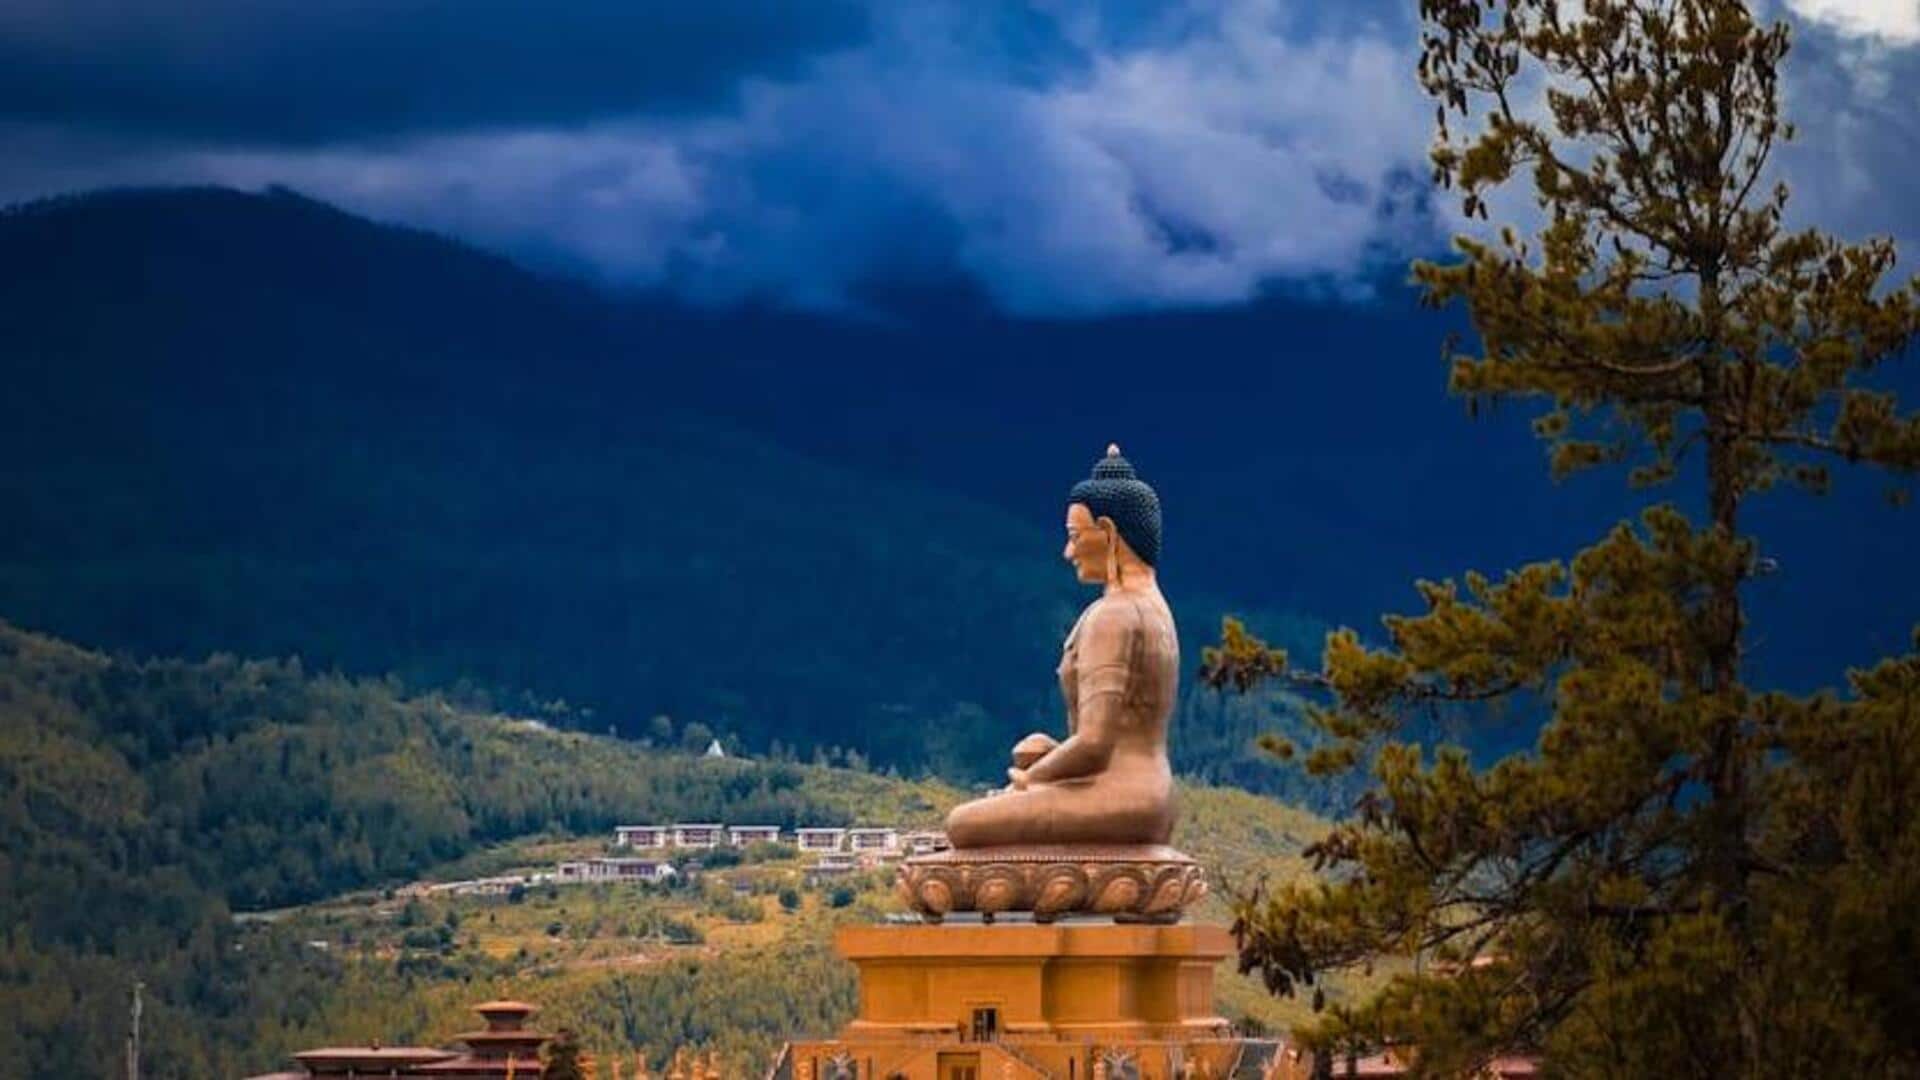 Travel through Bhutan's spiritual side with these recommendations